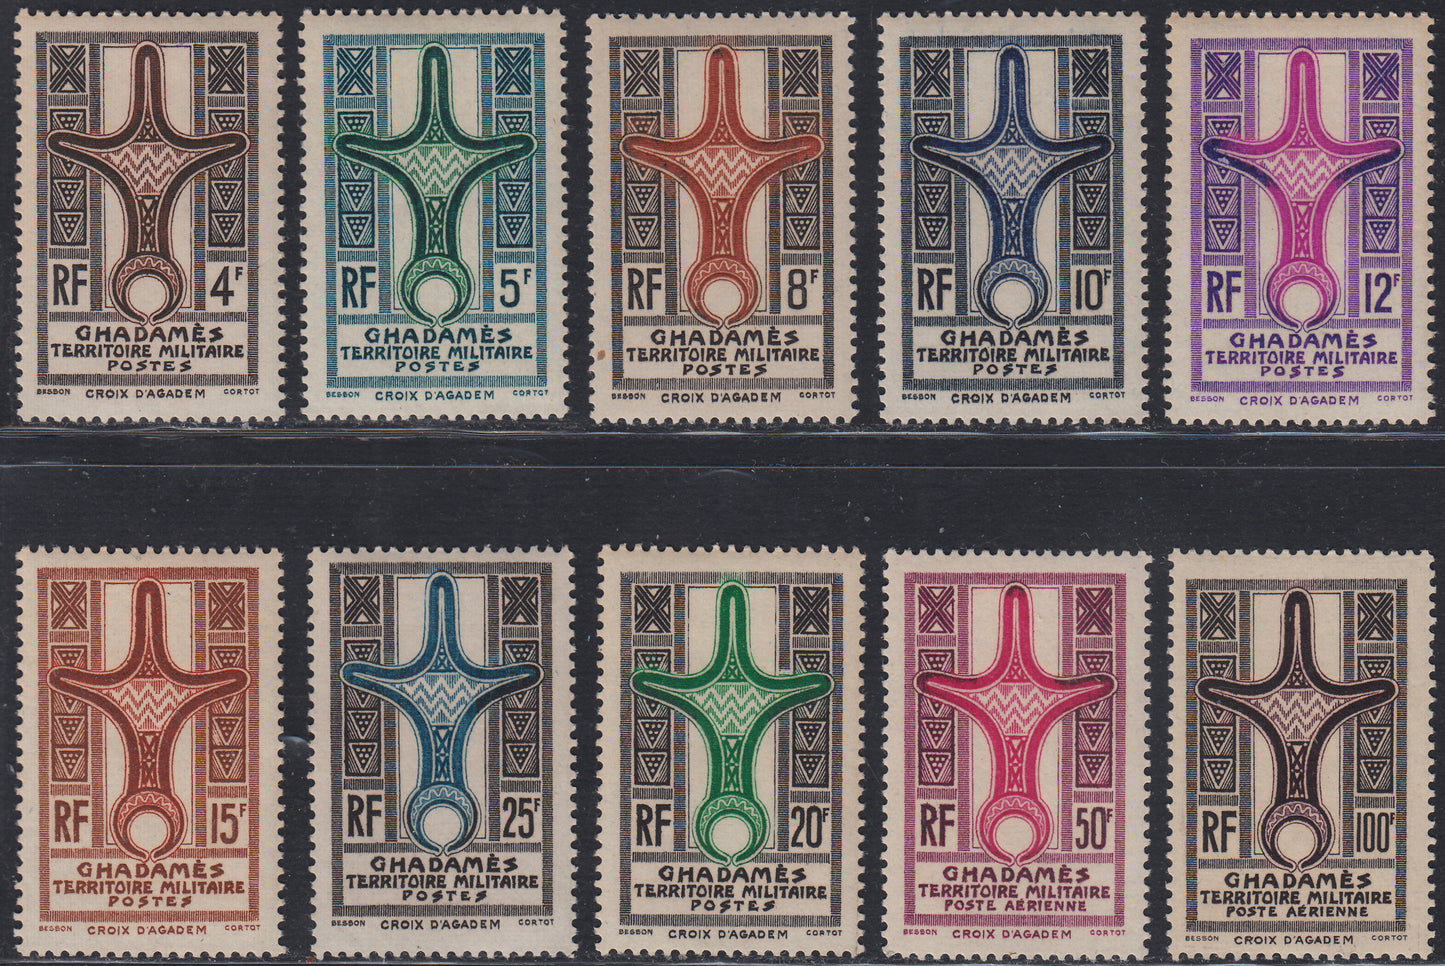 Fez26 - 1949 - French occupation of Fezzan and Ghadames, series issued for Ghadamesh, ordinary mail + undamaged new airmail (41/48 + A5/6). 